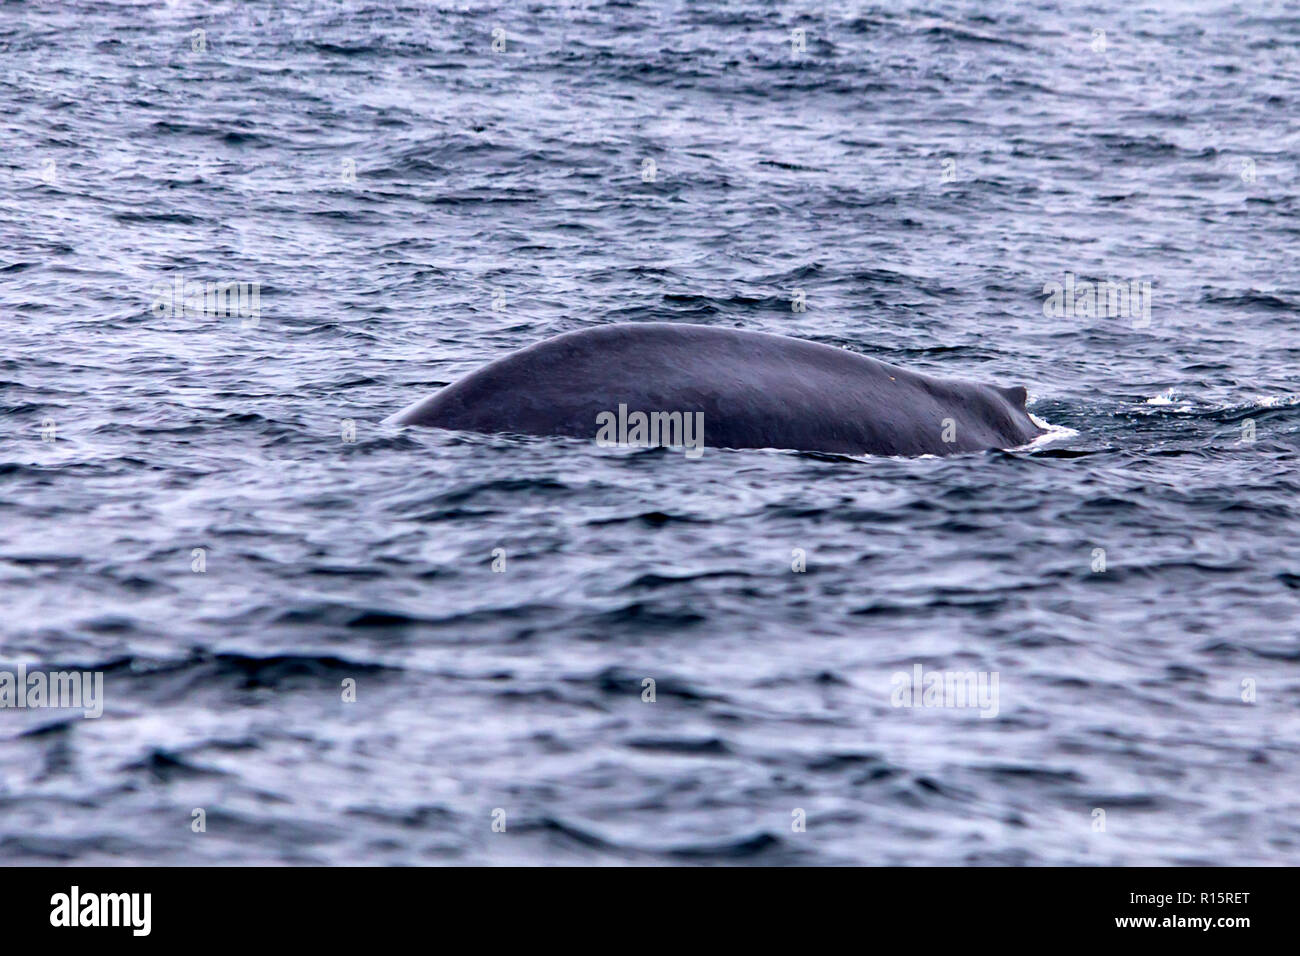 A blue whale or Balaenoptera musculus in water Stock Photo